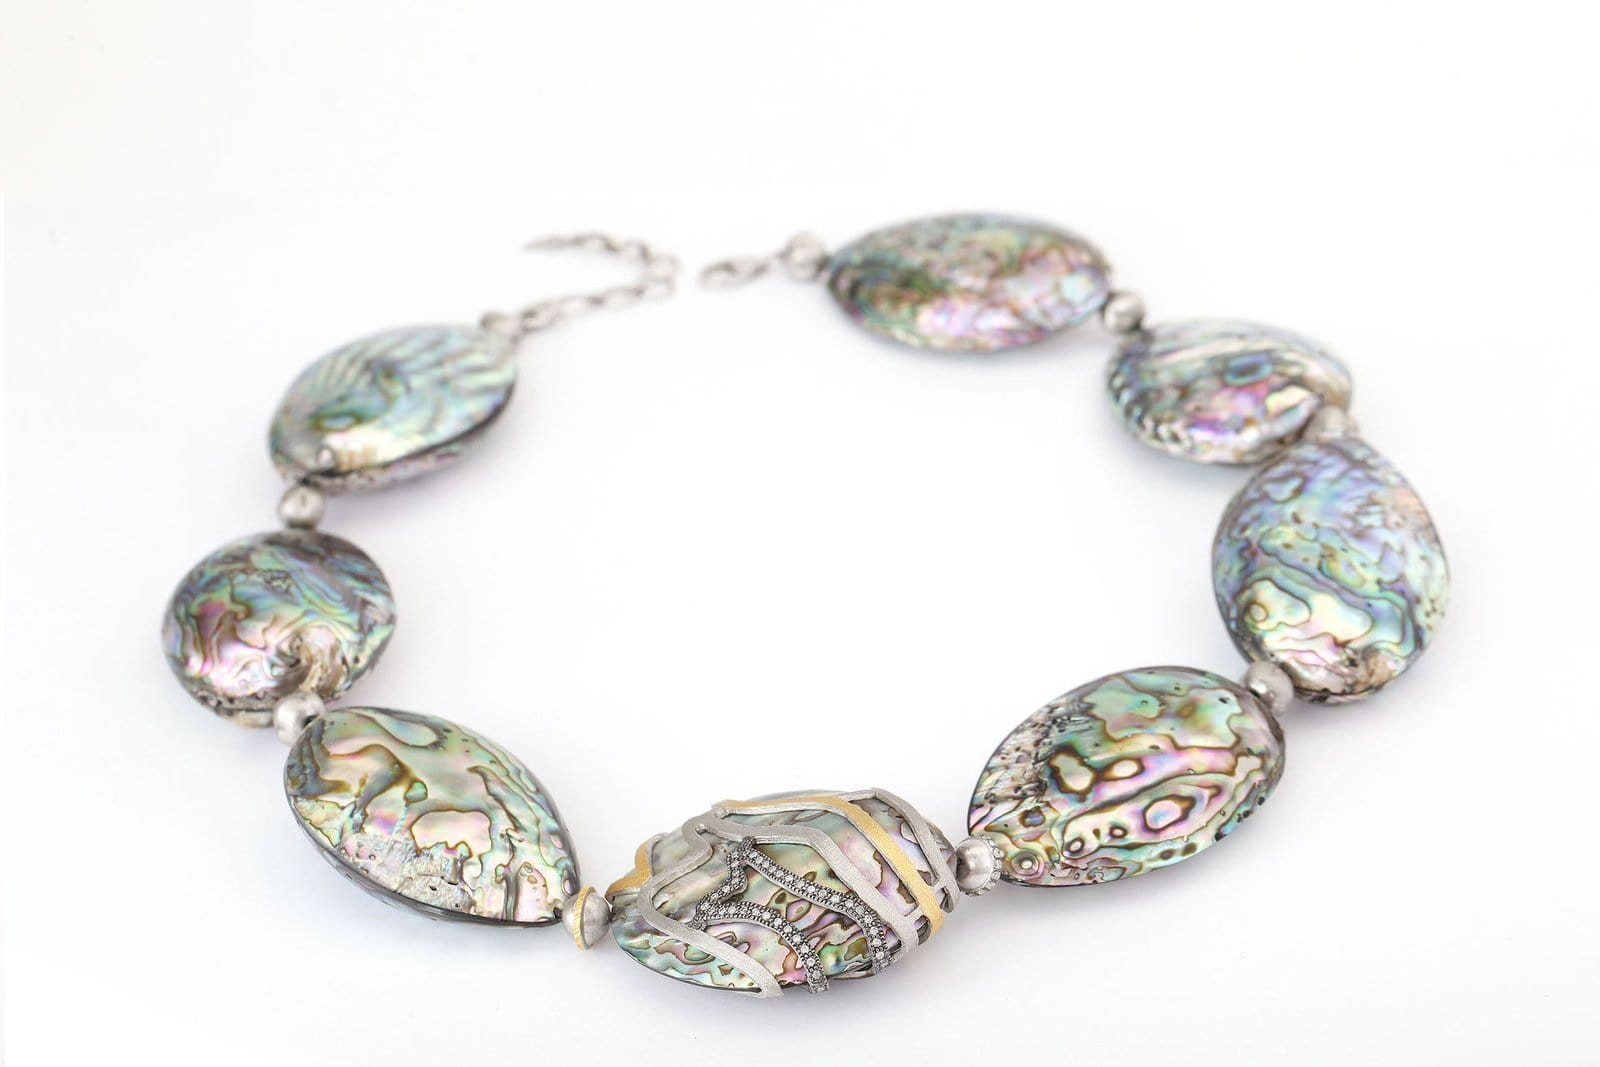 Affinity Sterling Silver Abalone and Diamond Necklace - Coomi